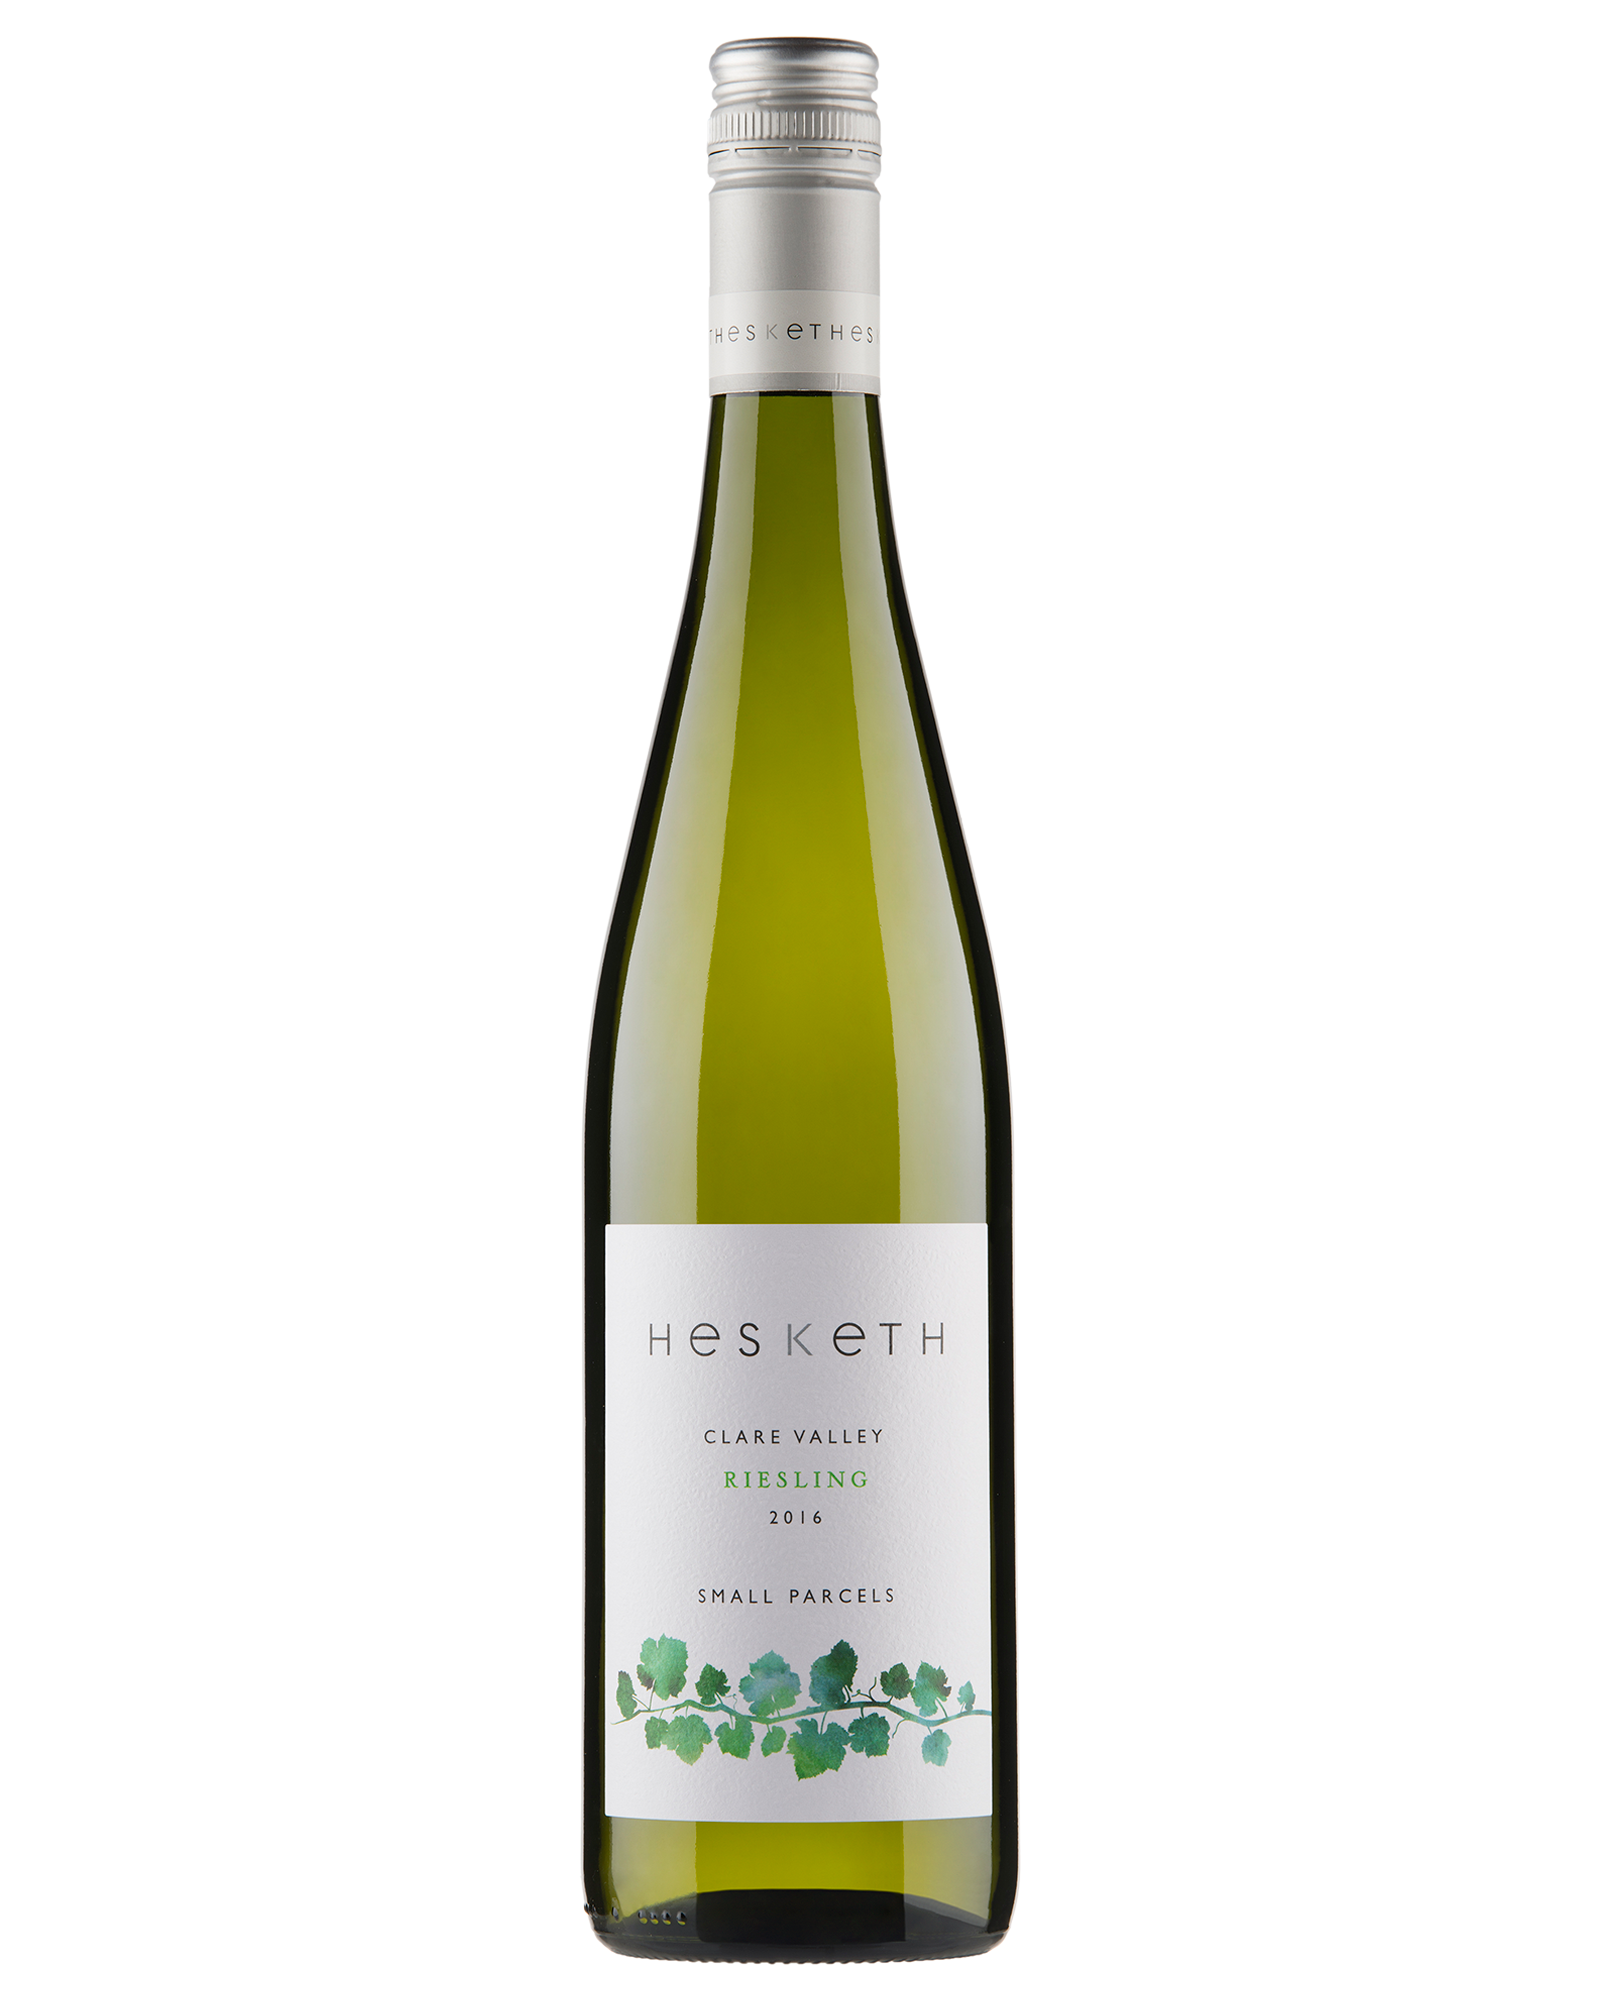 Hesketh Small Parcels Clare Valley Riesling 2016